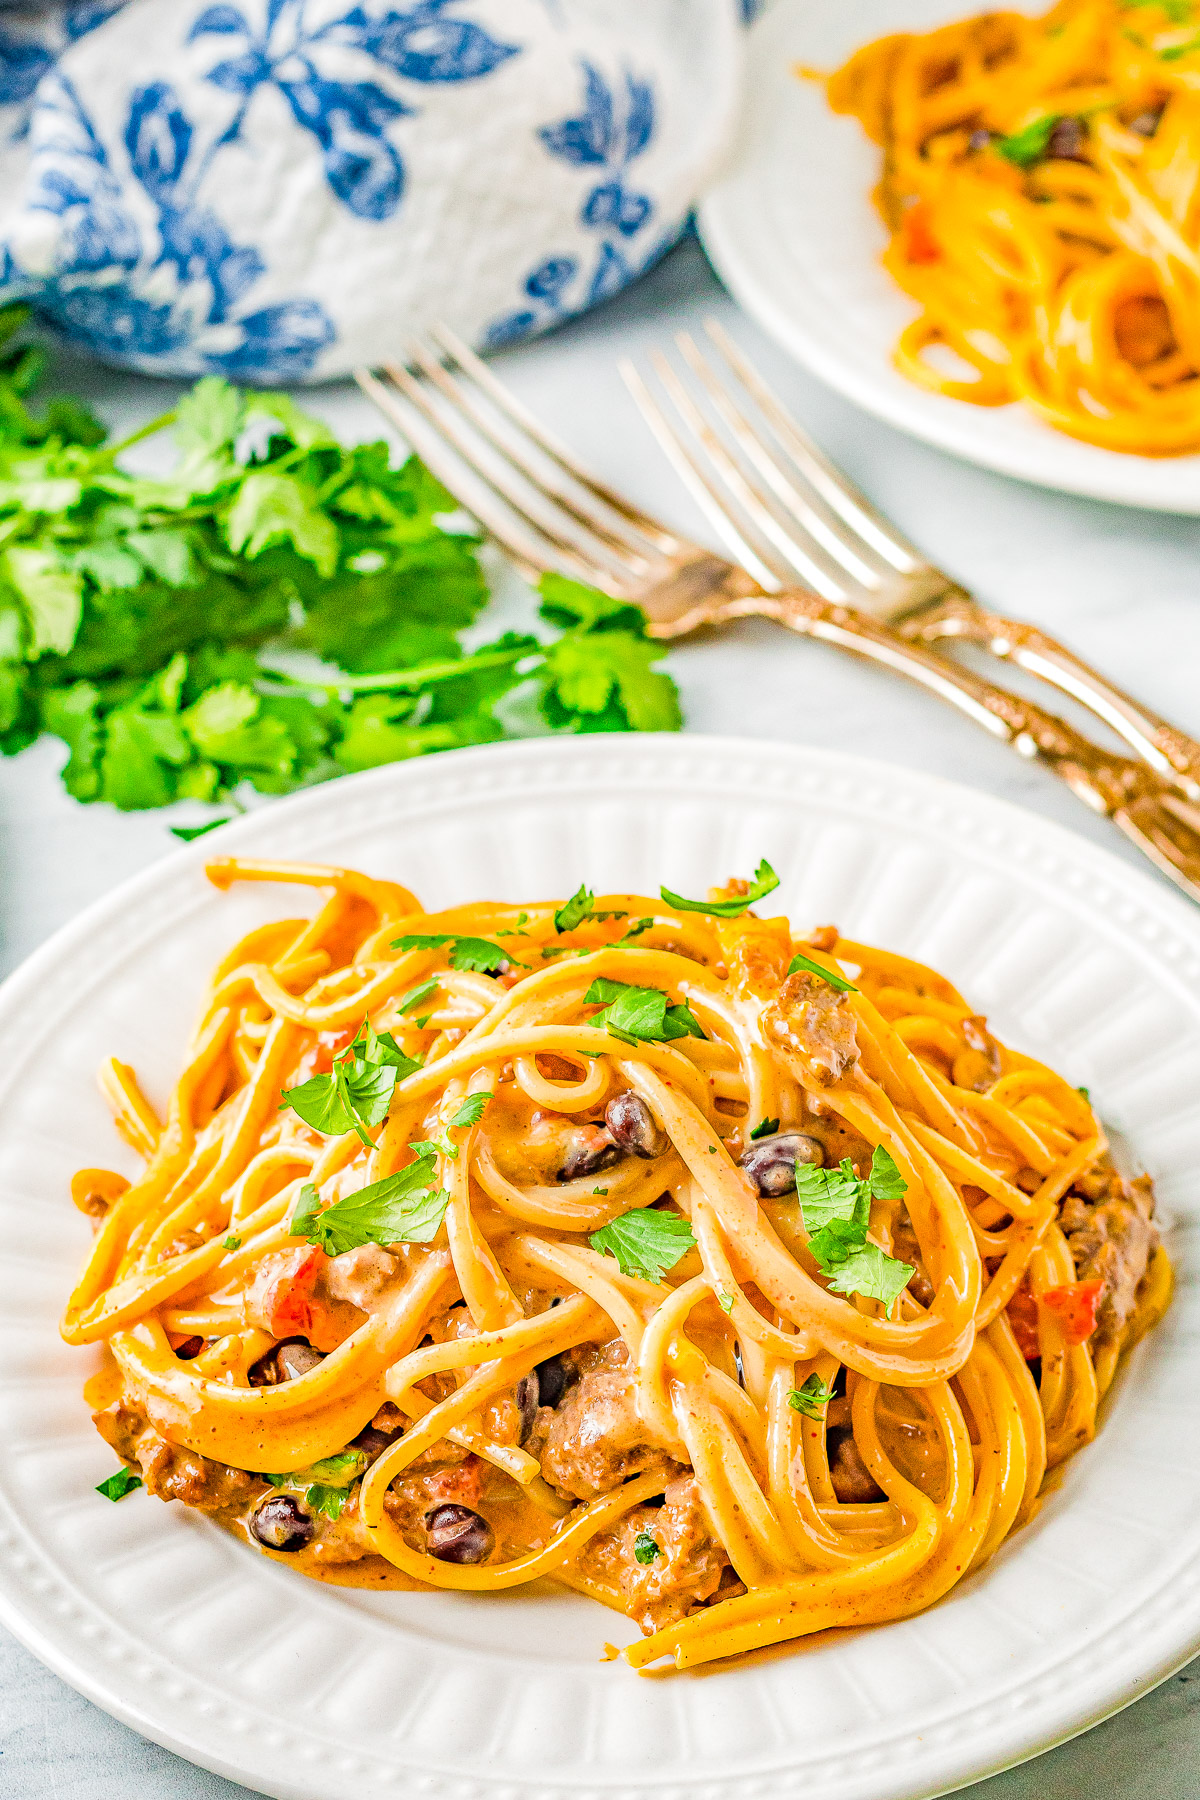 Taco Spaghetti - Tender spaghetti noodles are tossed in a creamy cheese sauce along with seasoned ground beef, tomatoes, green chiles, black beans, and cilantro! The PERFECT family-friendly weeknight dinner recipe that's super EASY and ready in 30 minutes!